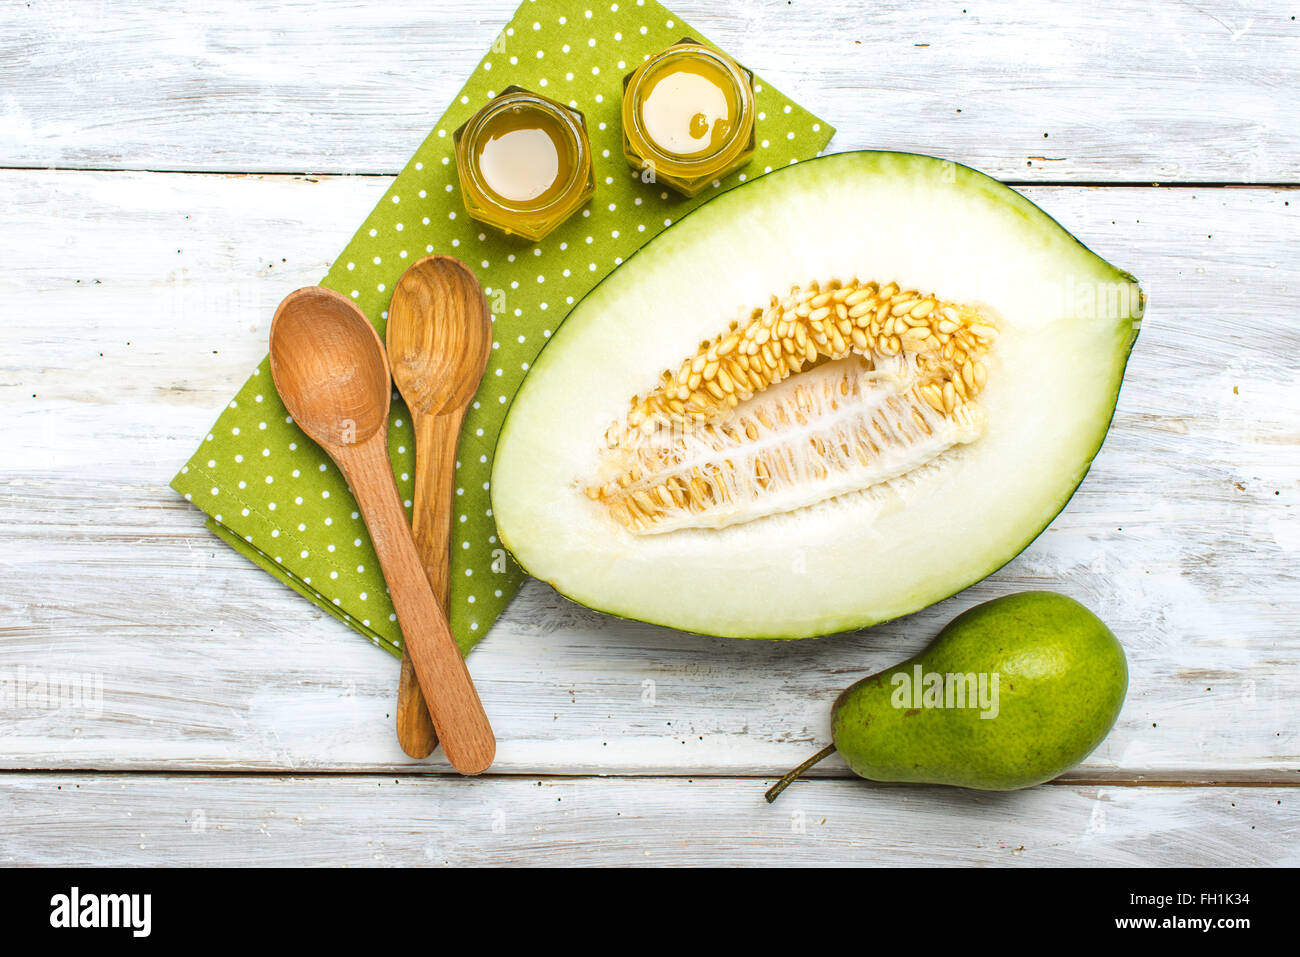 Cut melon green pear and honey on white board in rustic style Stock Photo